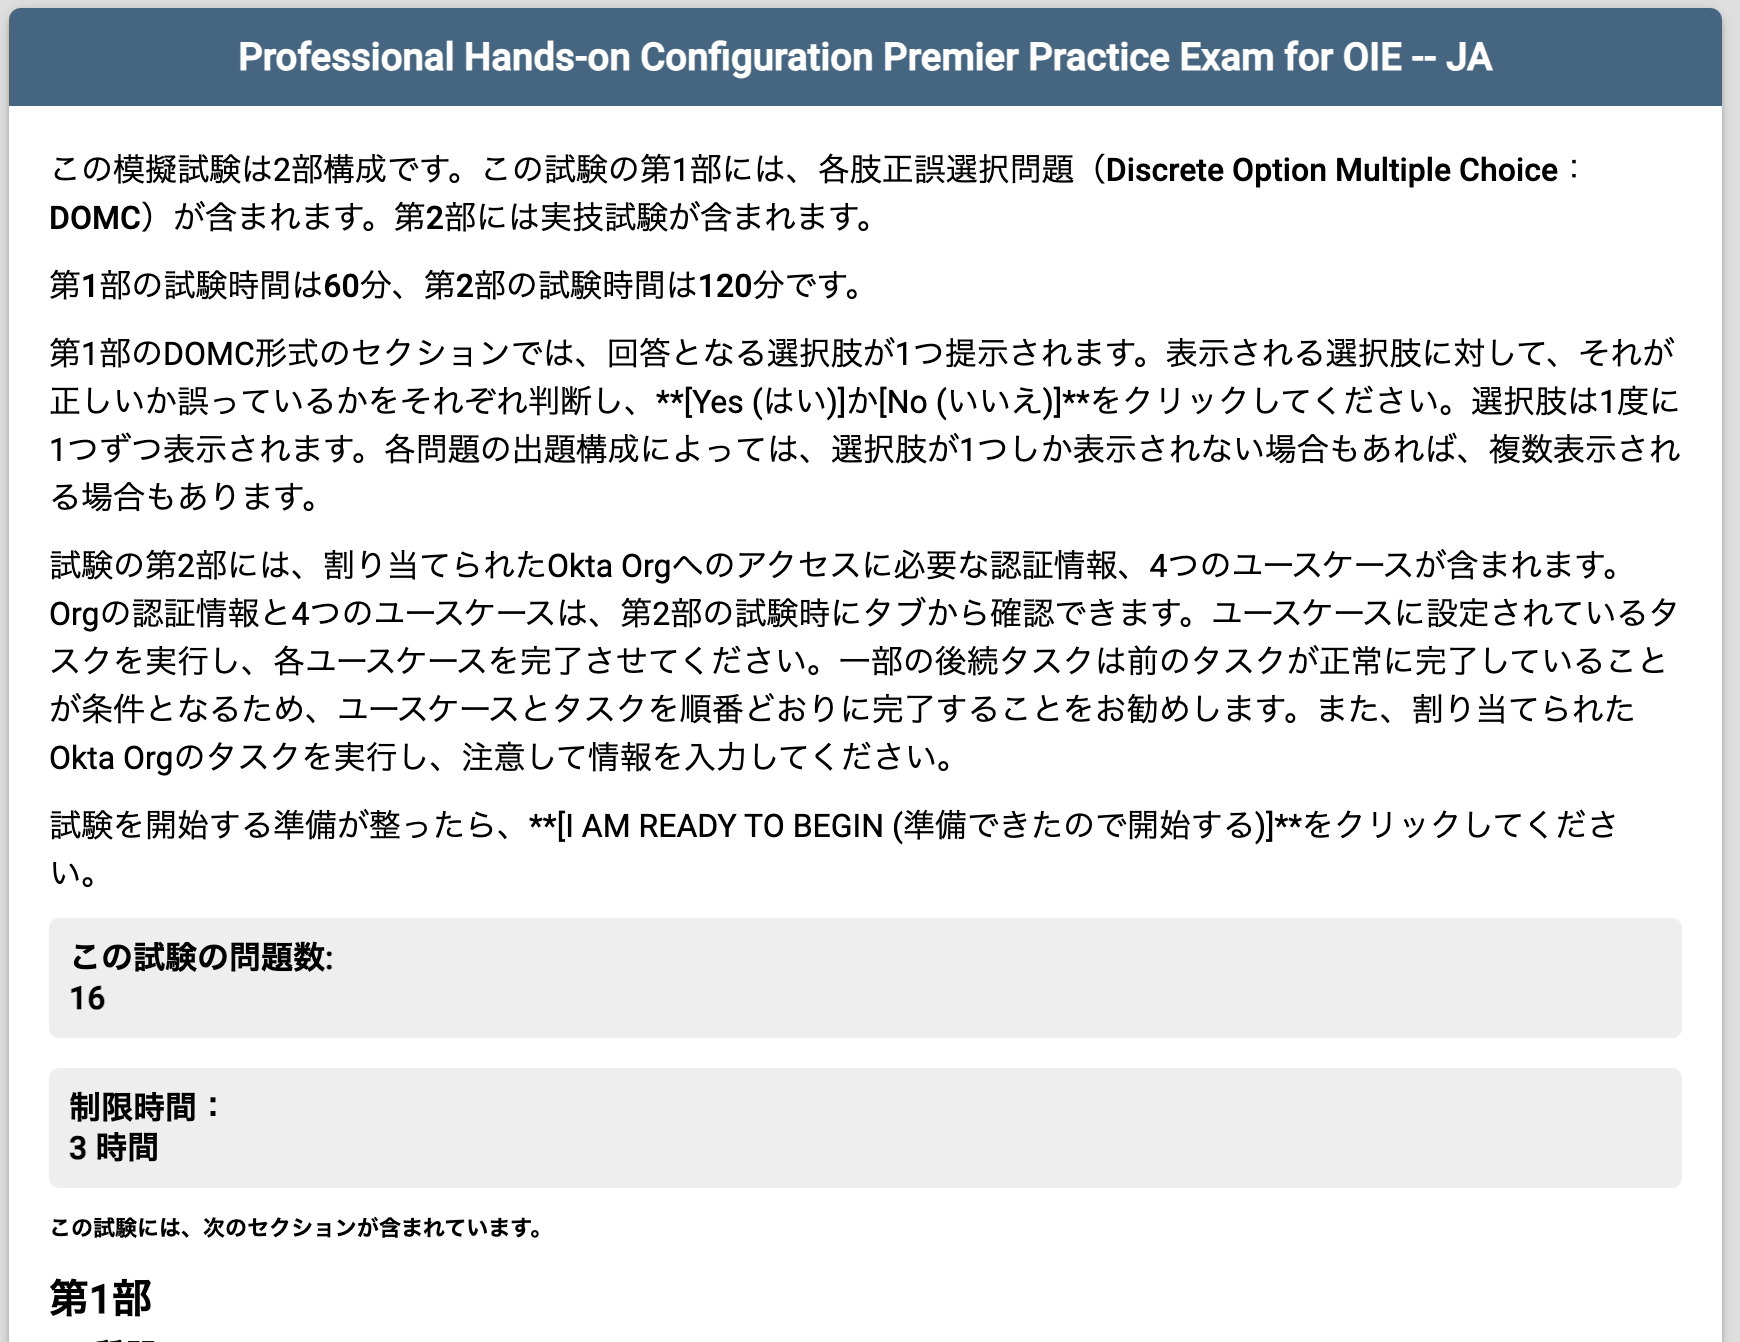 Image of the Exams portal, featuring the Professional Hands-on Configuration Premier Practice Exam for OIE - JA.